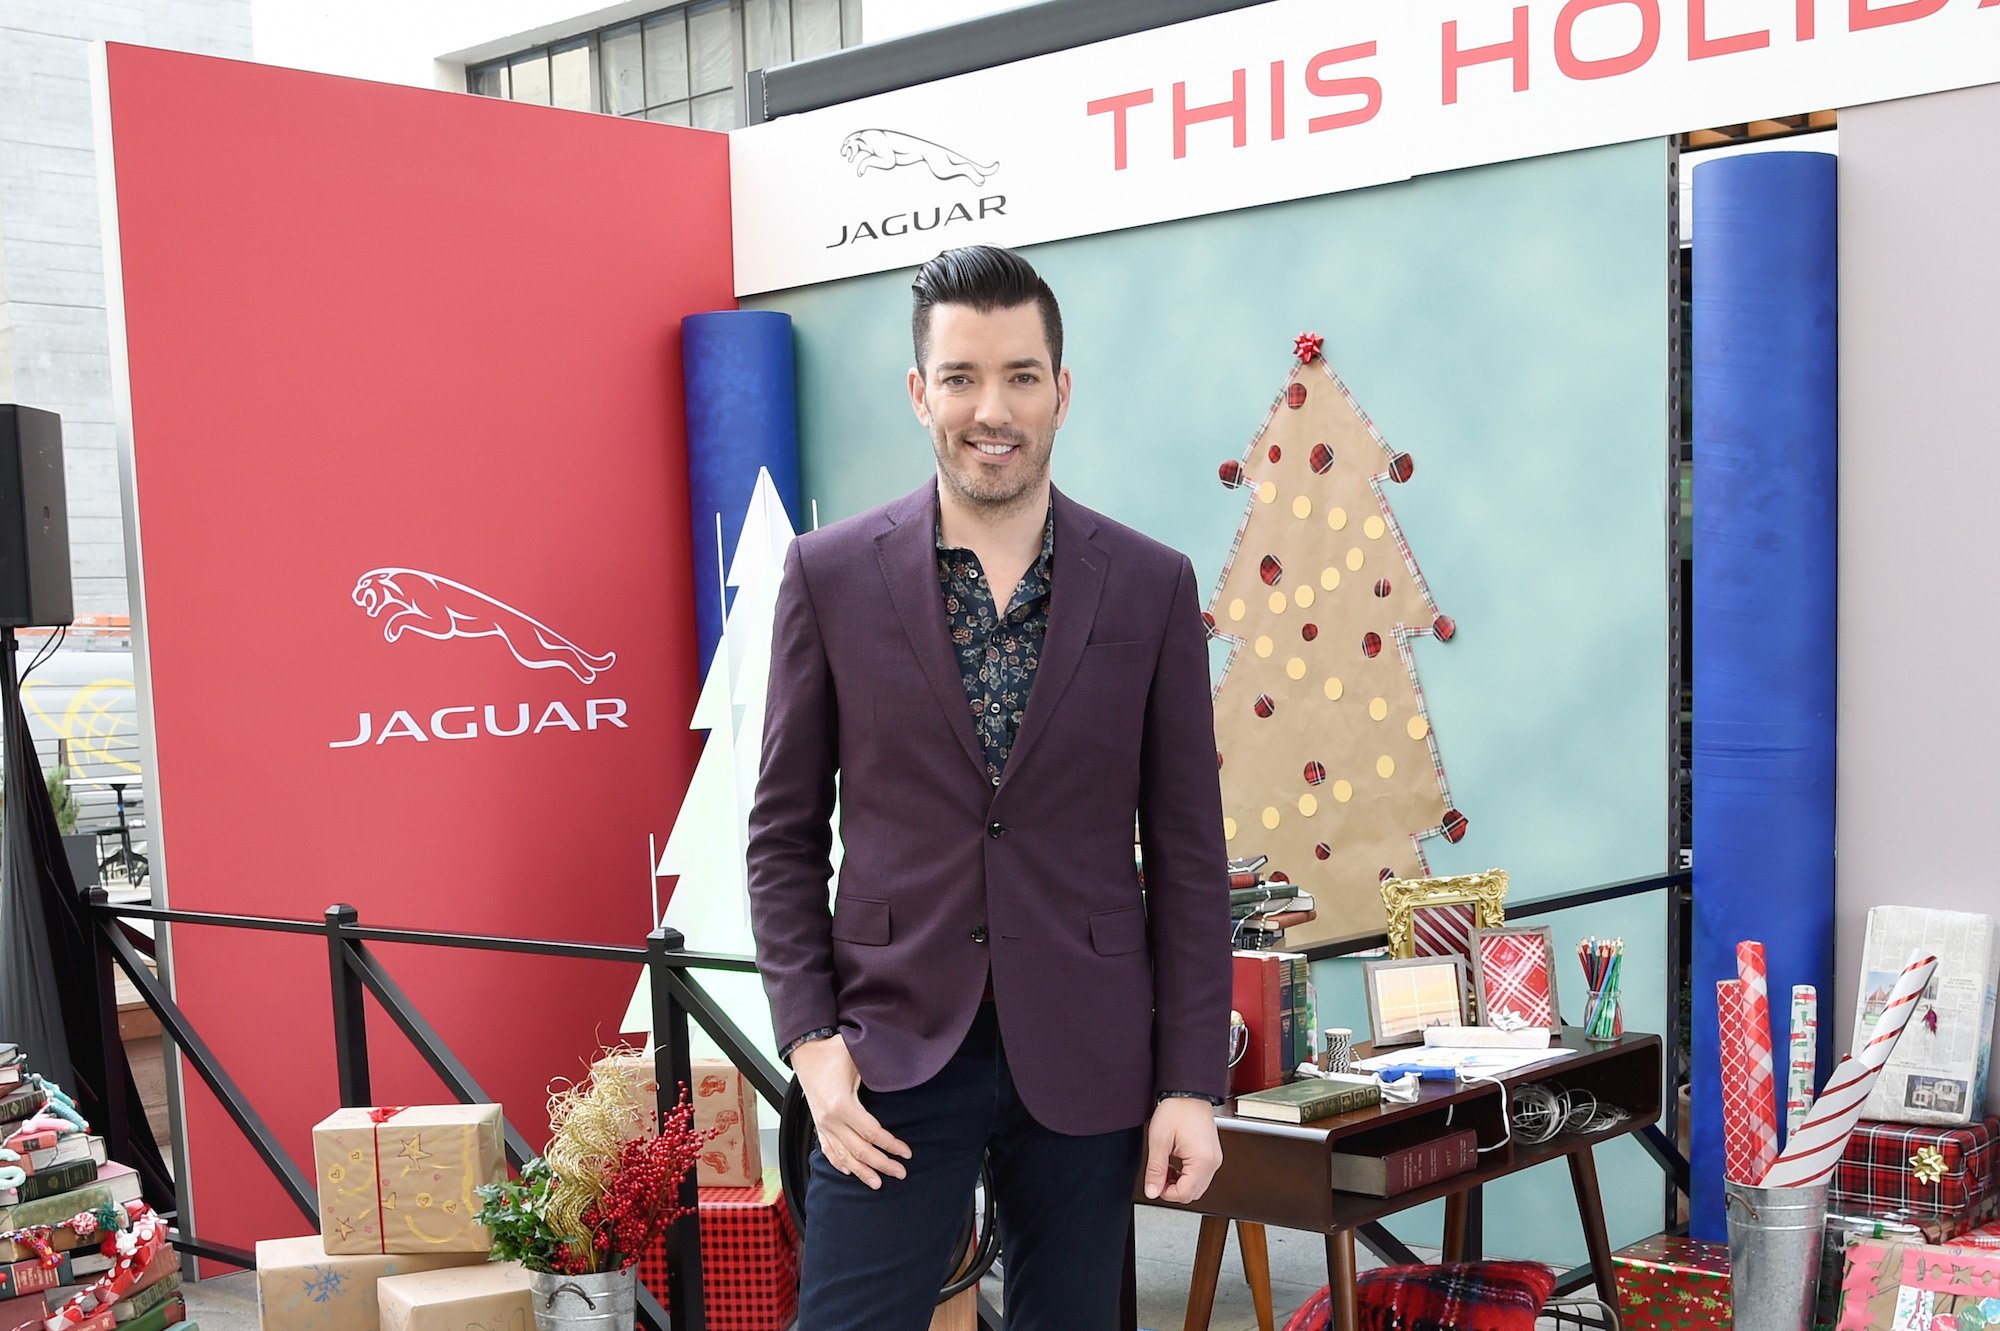 Jonathan Scott smiling in front of a holiday display